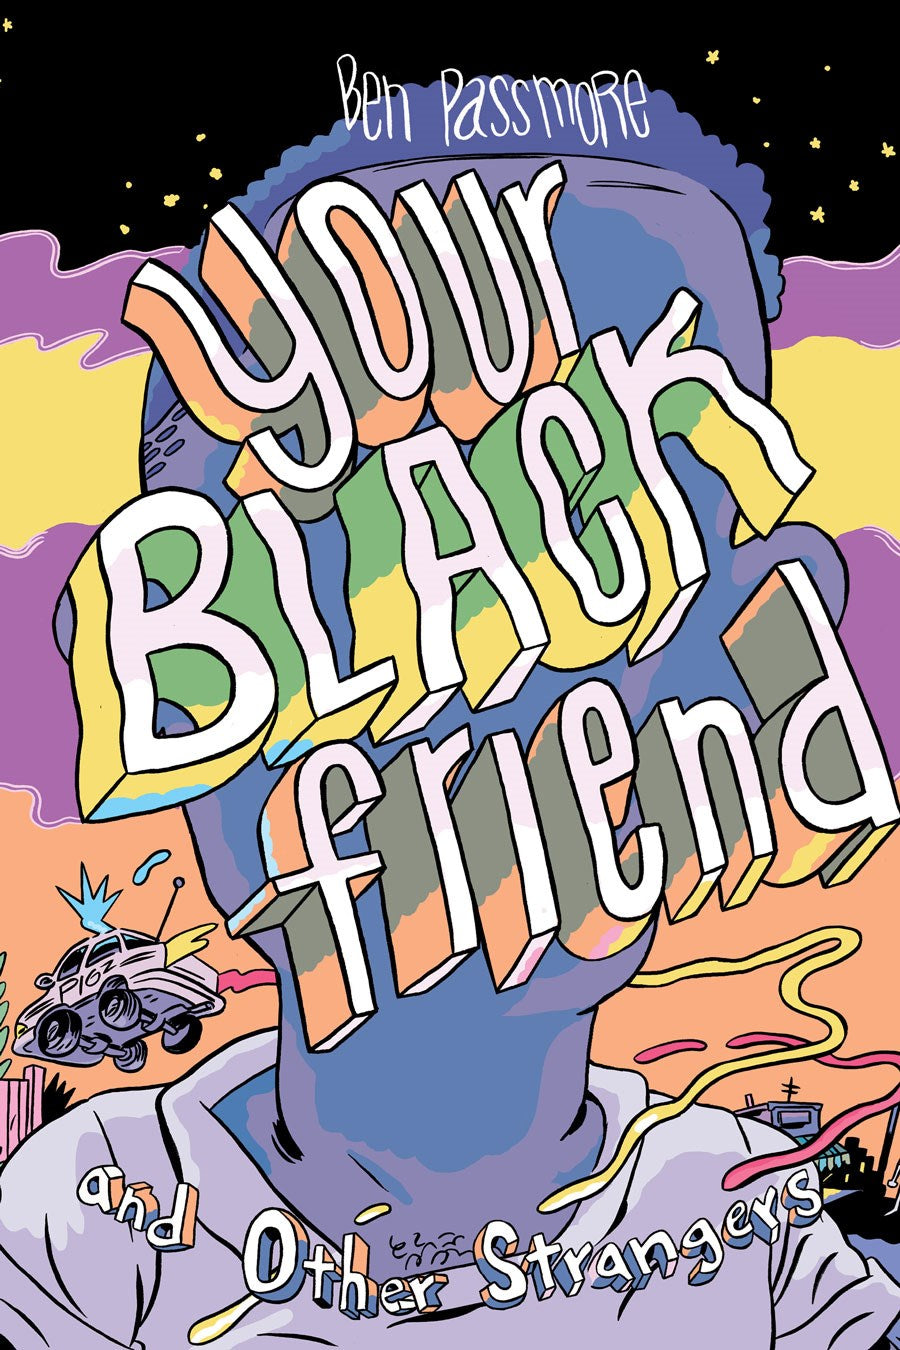 Your Black Friend and Other Strangers by Ben Passmore